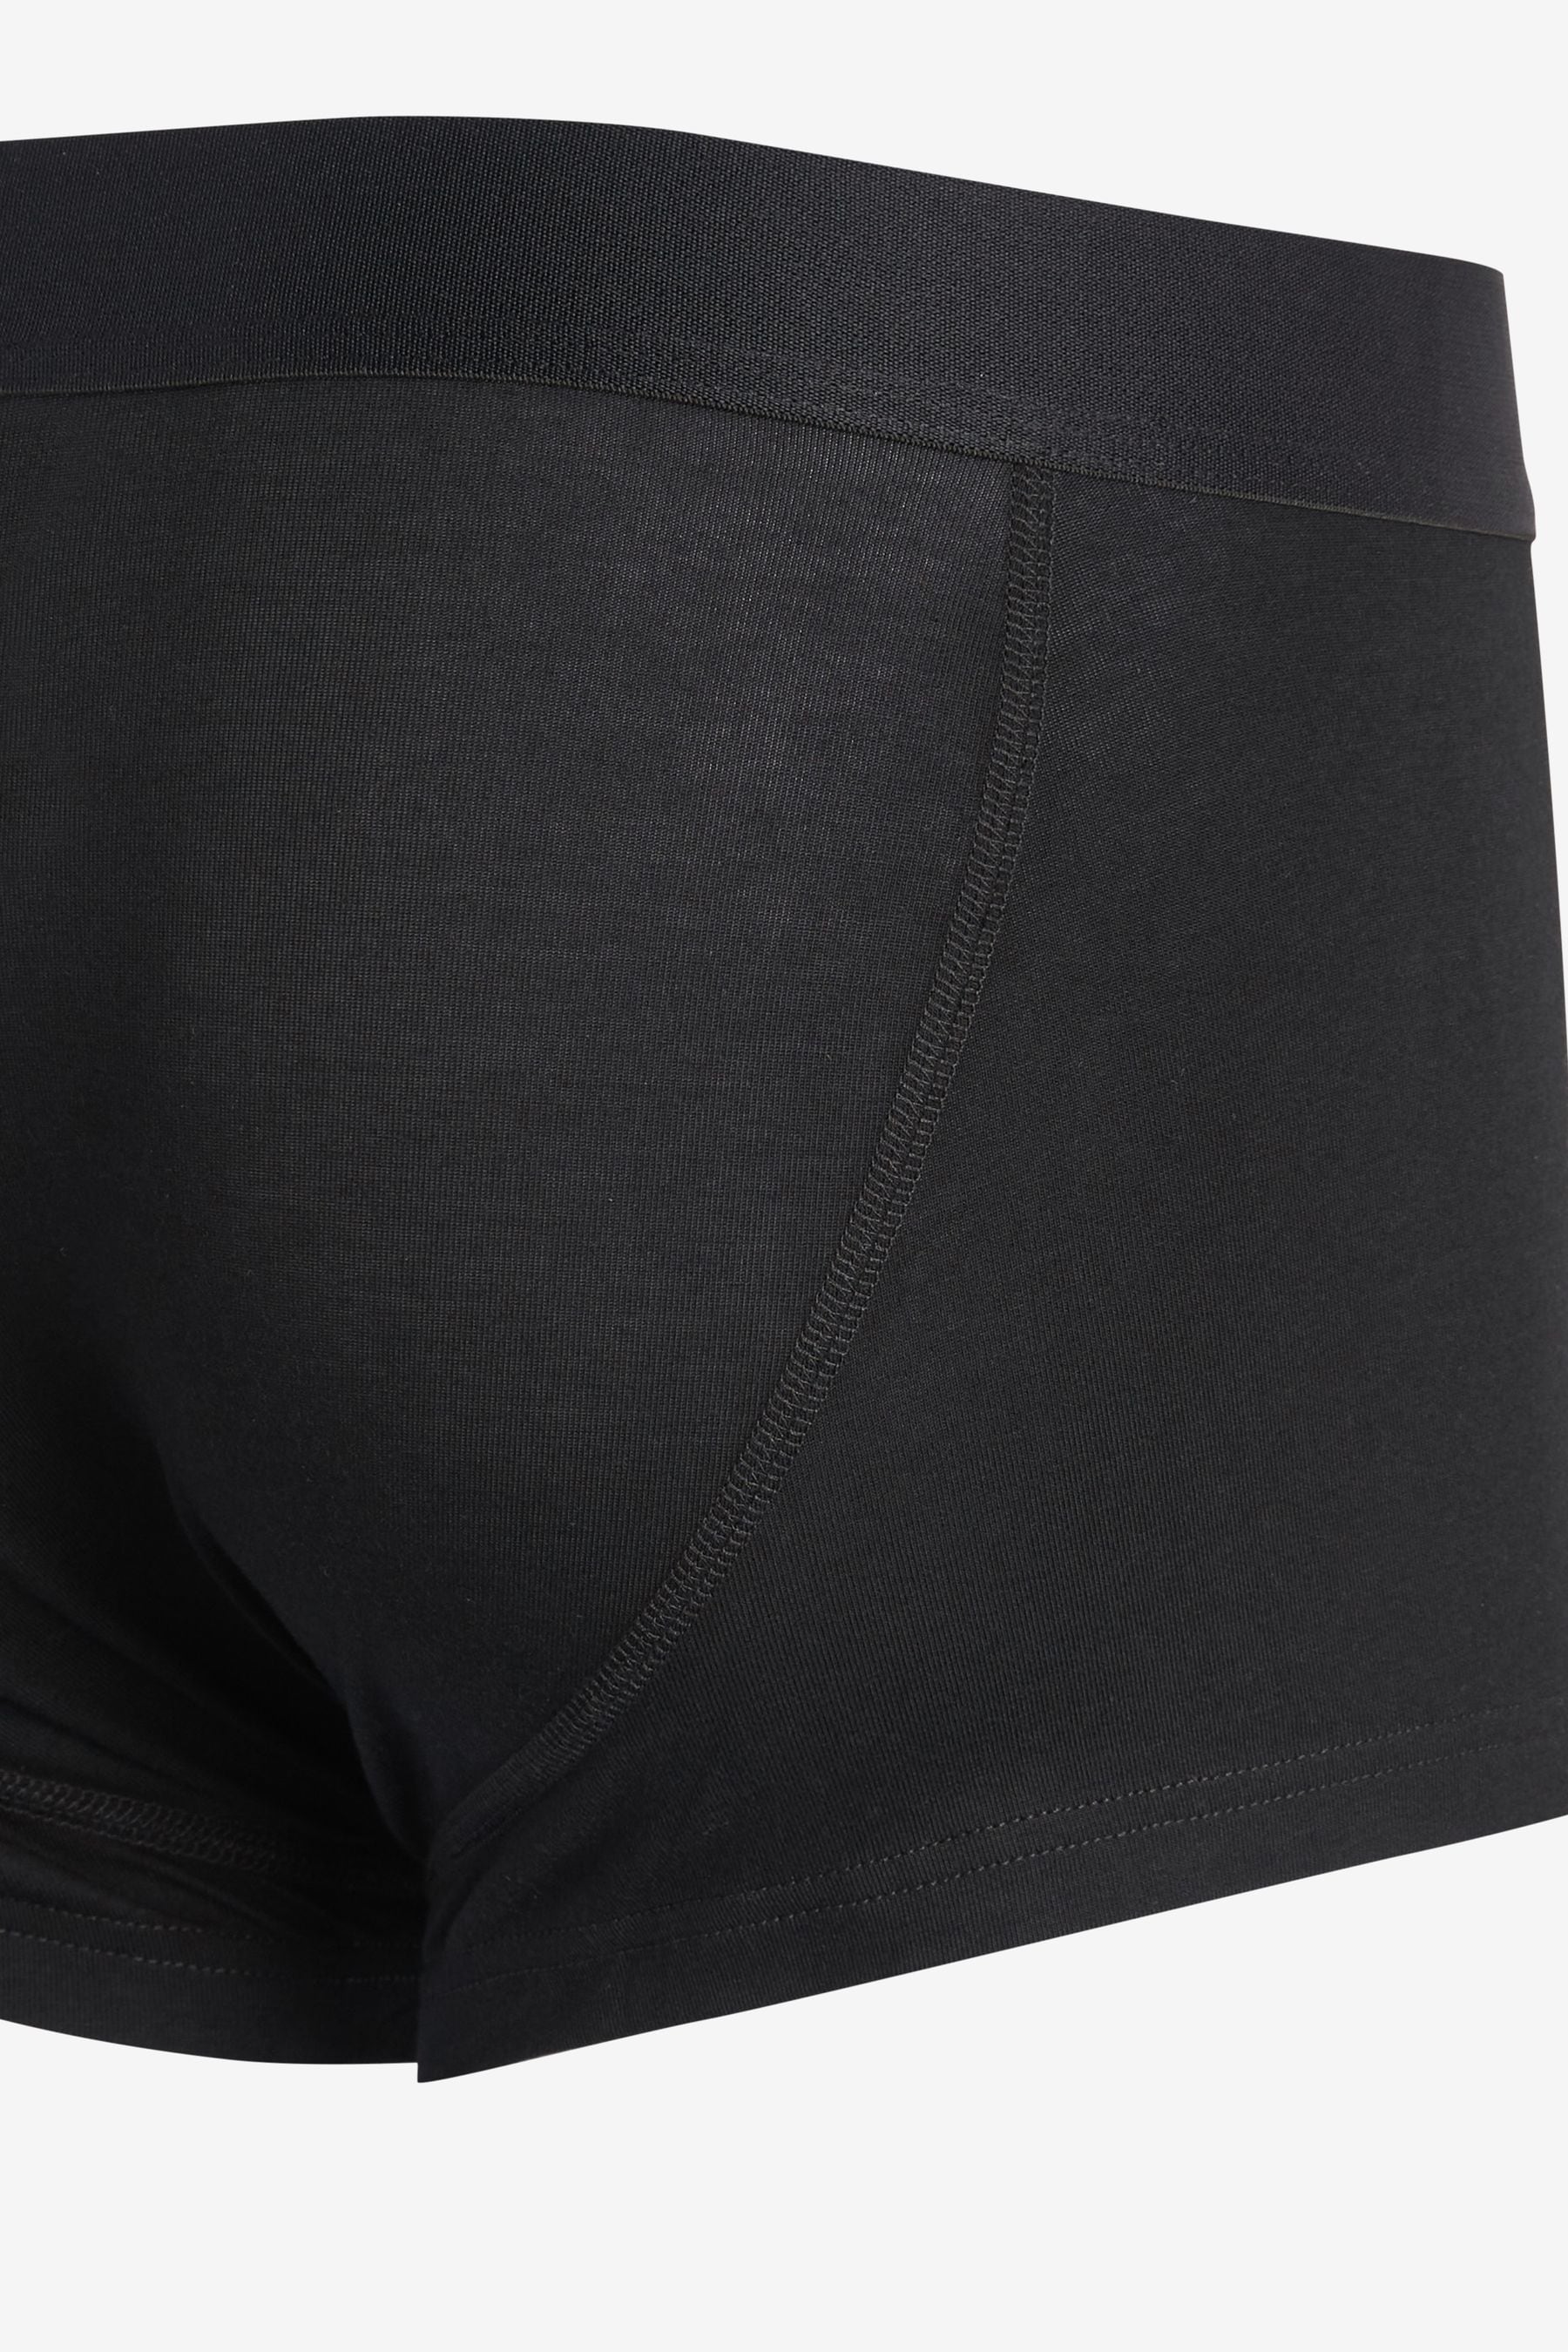 Buy Signature Black Bamboo 4 pack Hipster Boxers from Next Taiwan